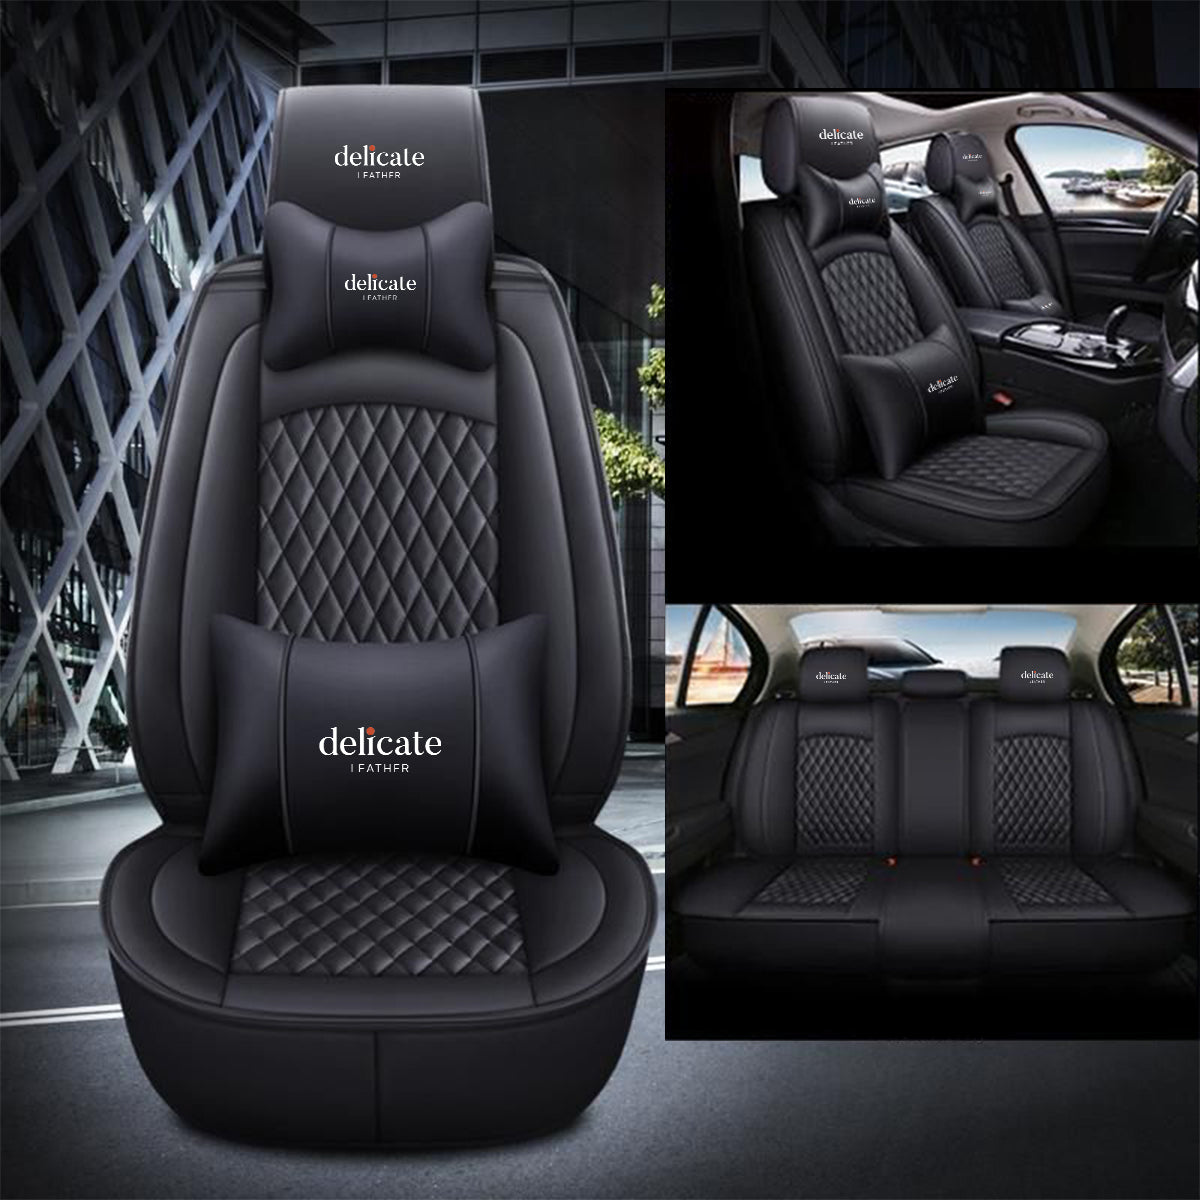 2 Car Seat Covers Full Set, Custom For Your Cars, Waterproof Leather F